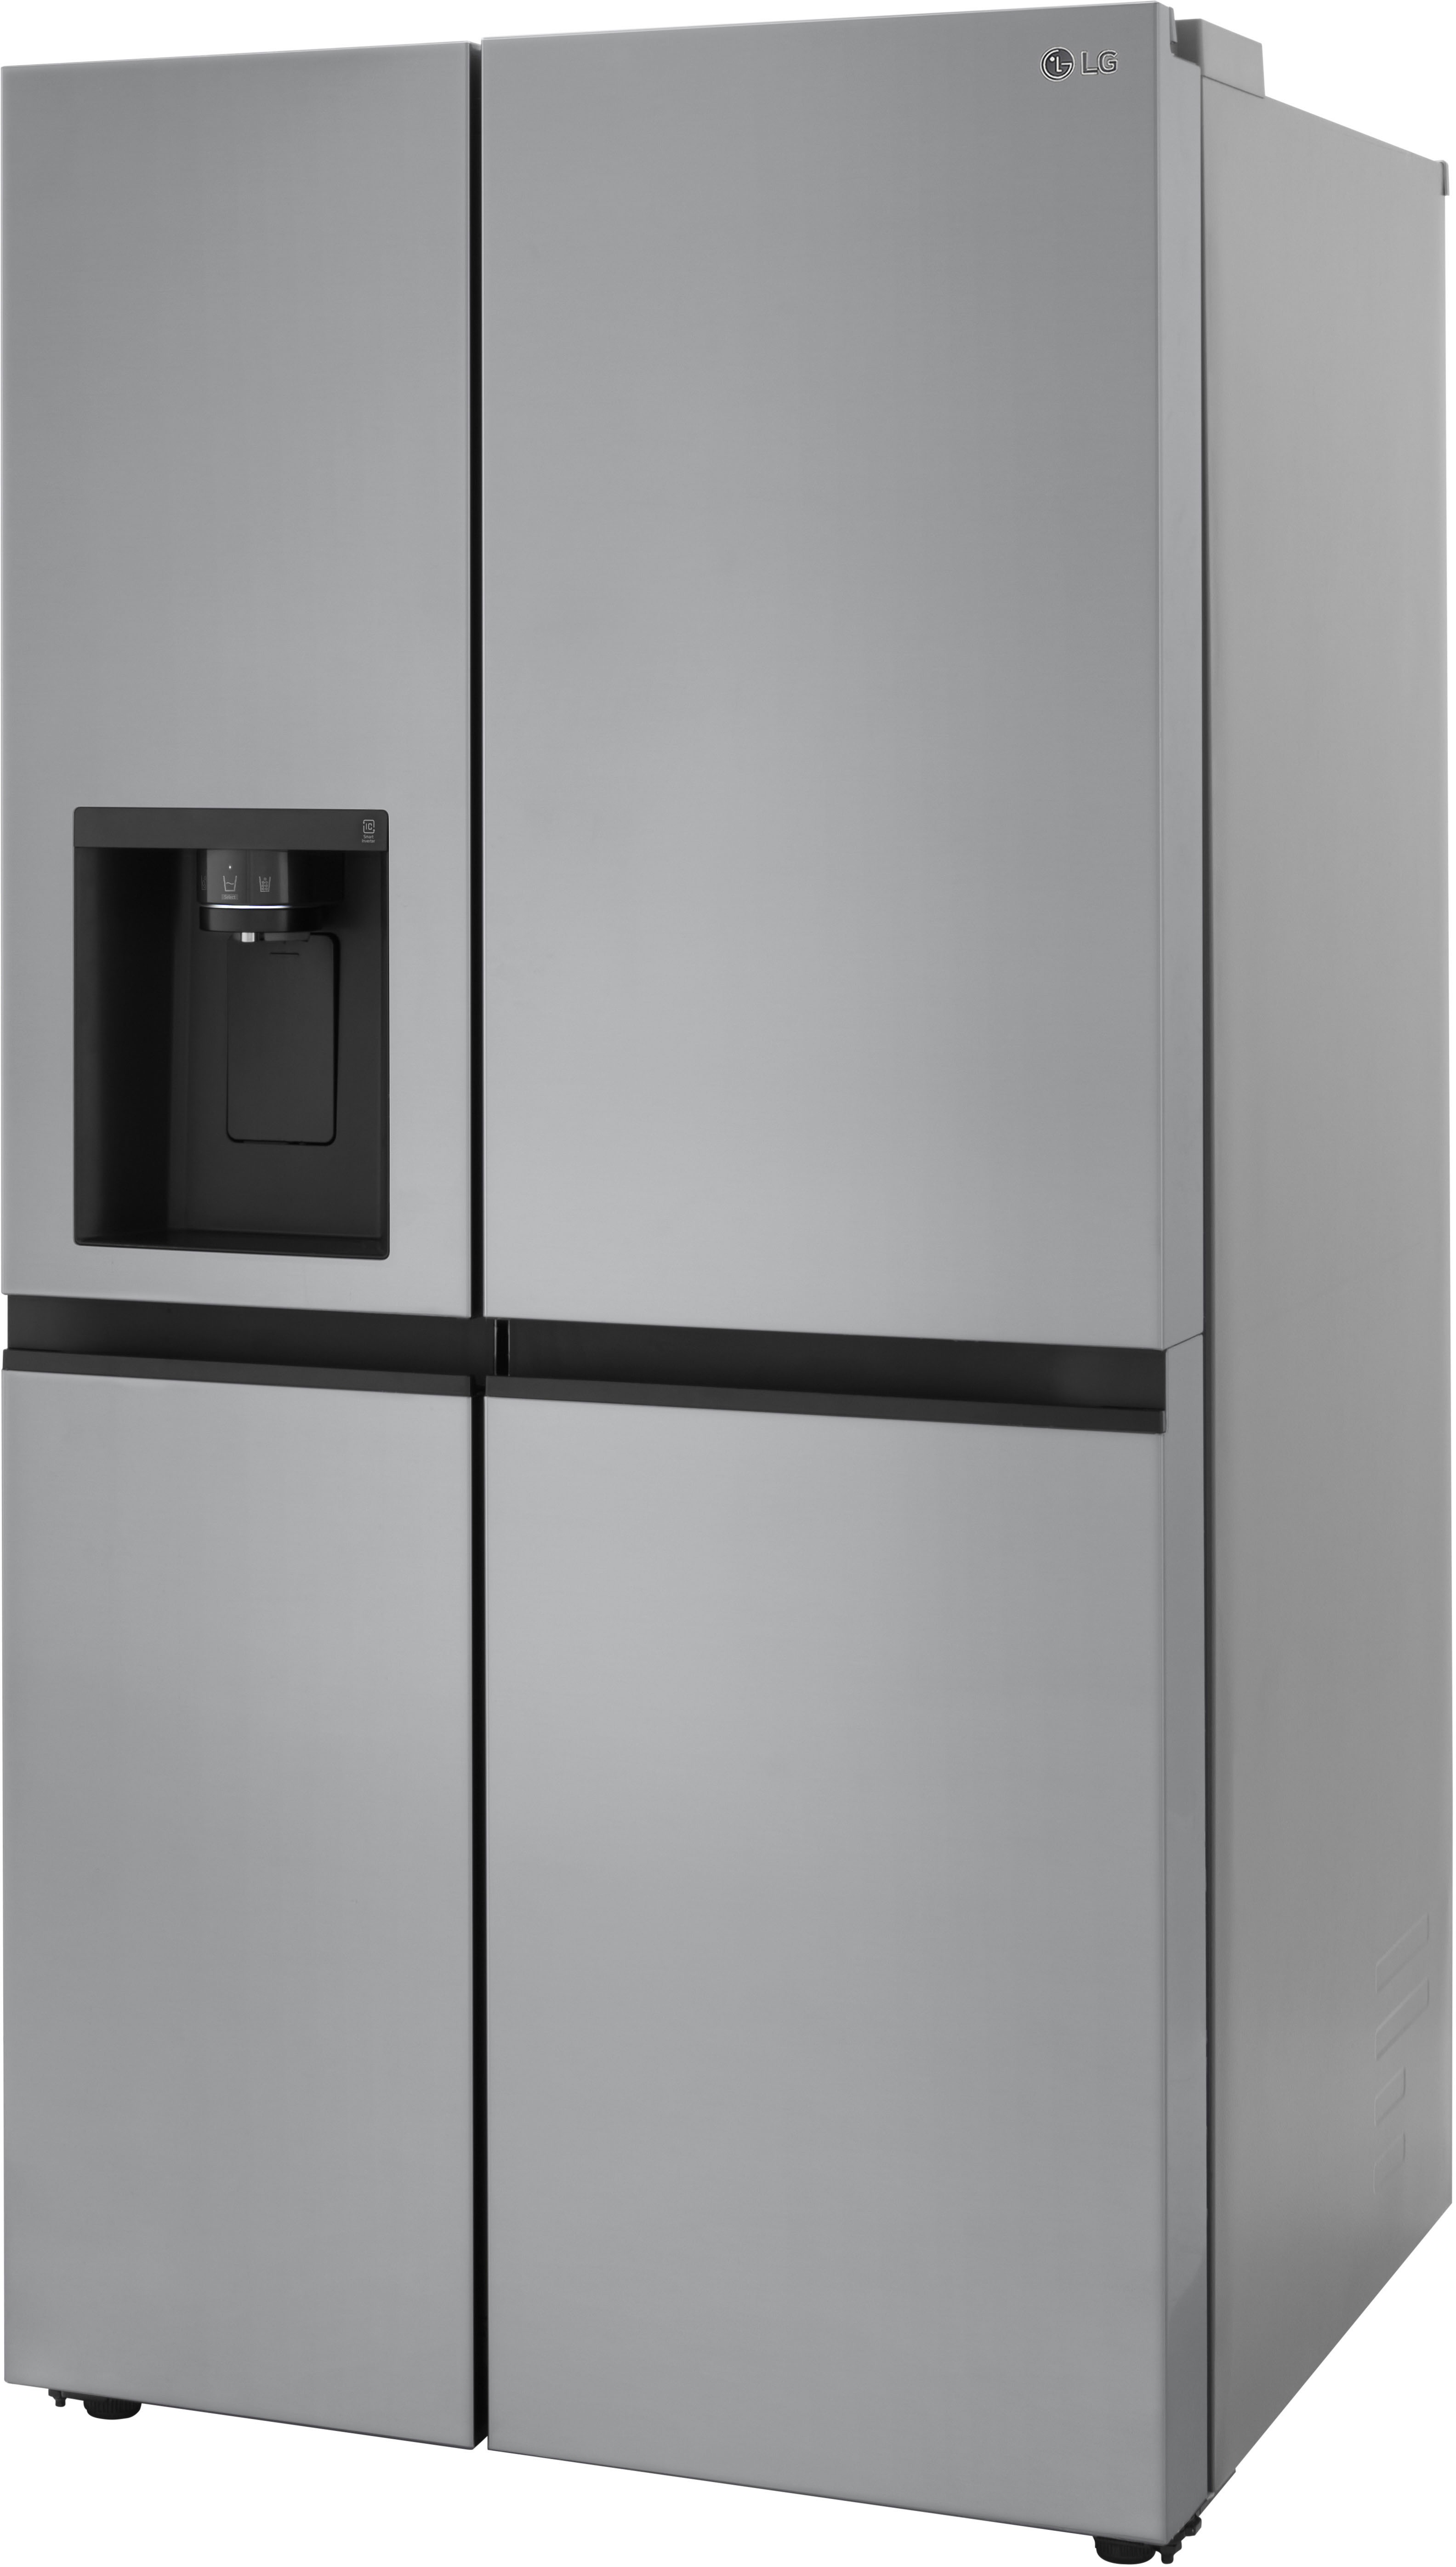 Angle View: Samsung - 23 cu. ft Bespoke Counter Depth 4-Door French Door Refrigerator with Family Hub™ - Charcoal